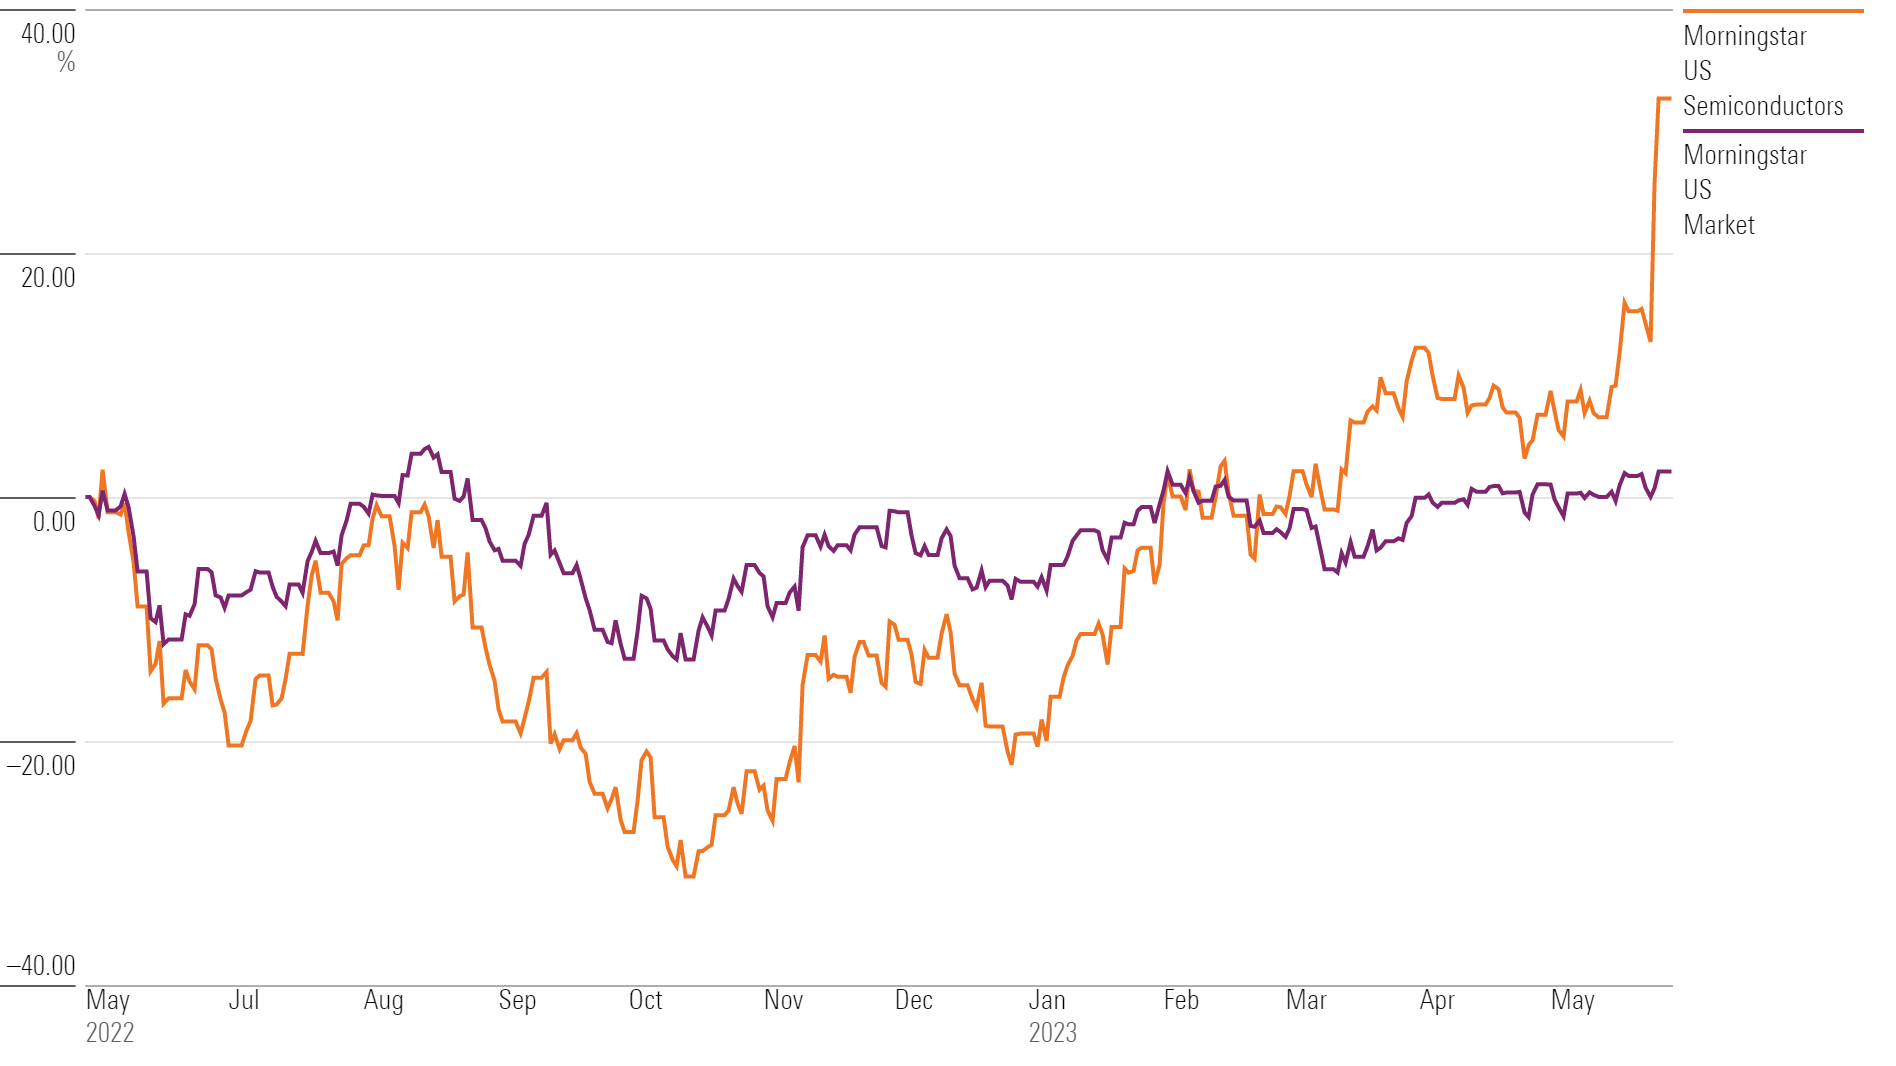 Line chart showing Morningstar Semiconductor Index compared to the Morningstar US Market Index from May 2022-May 2023.